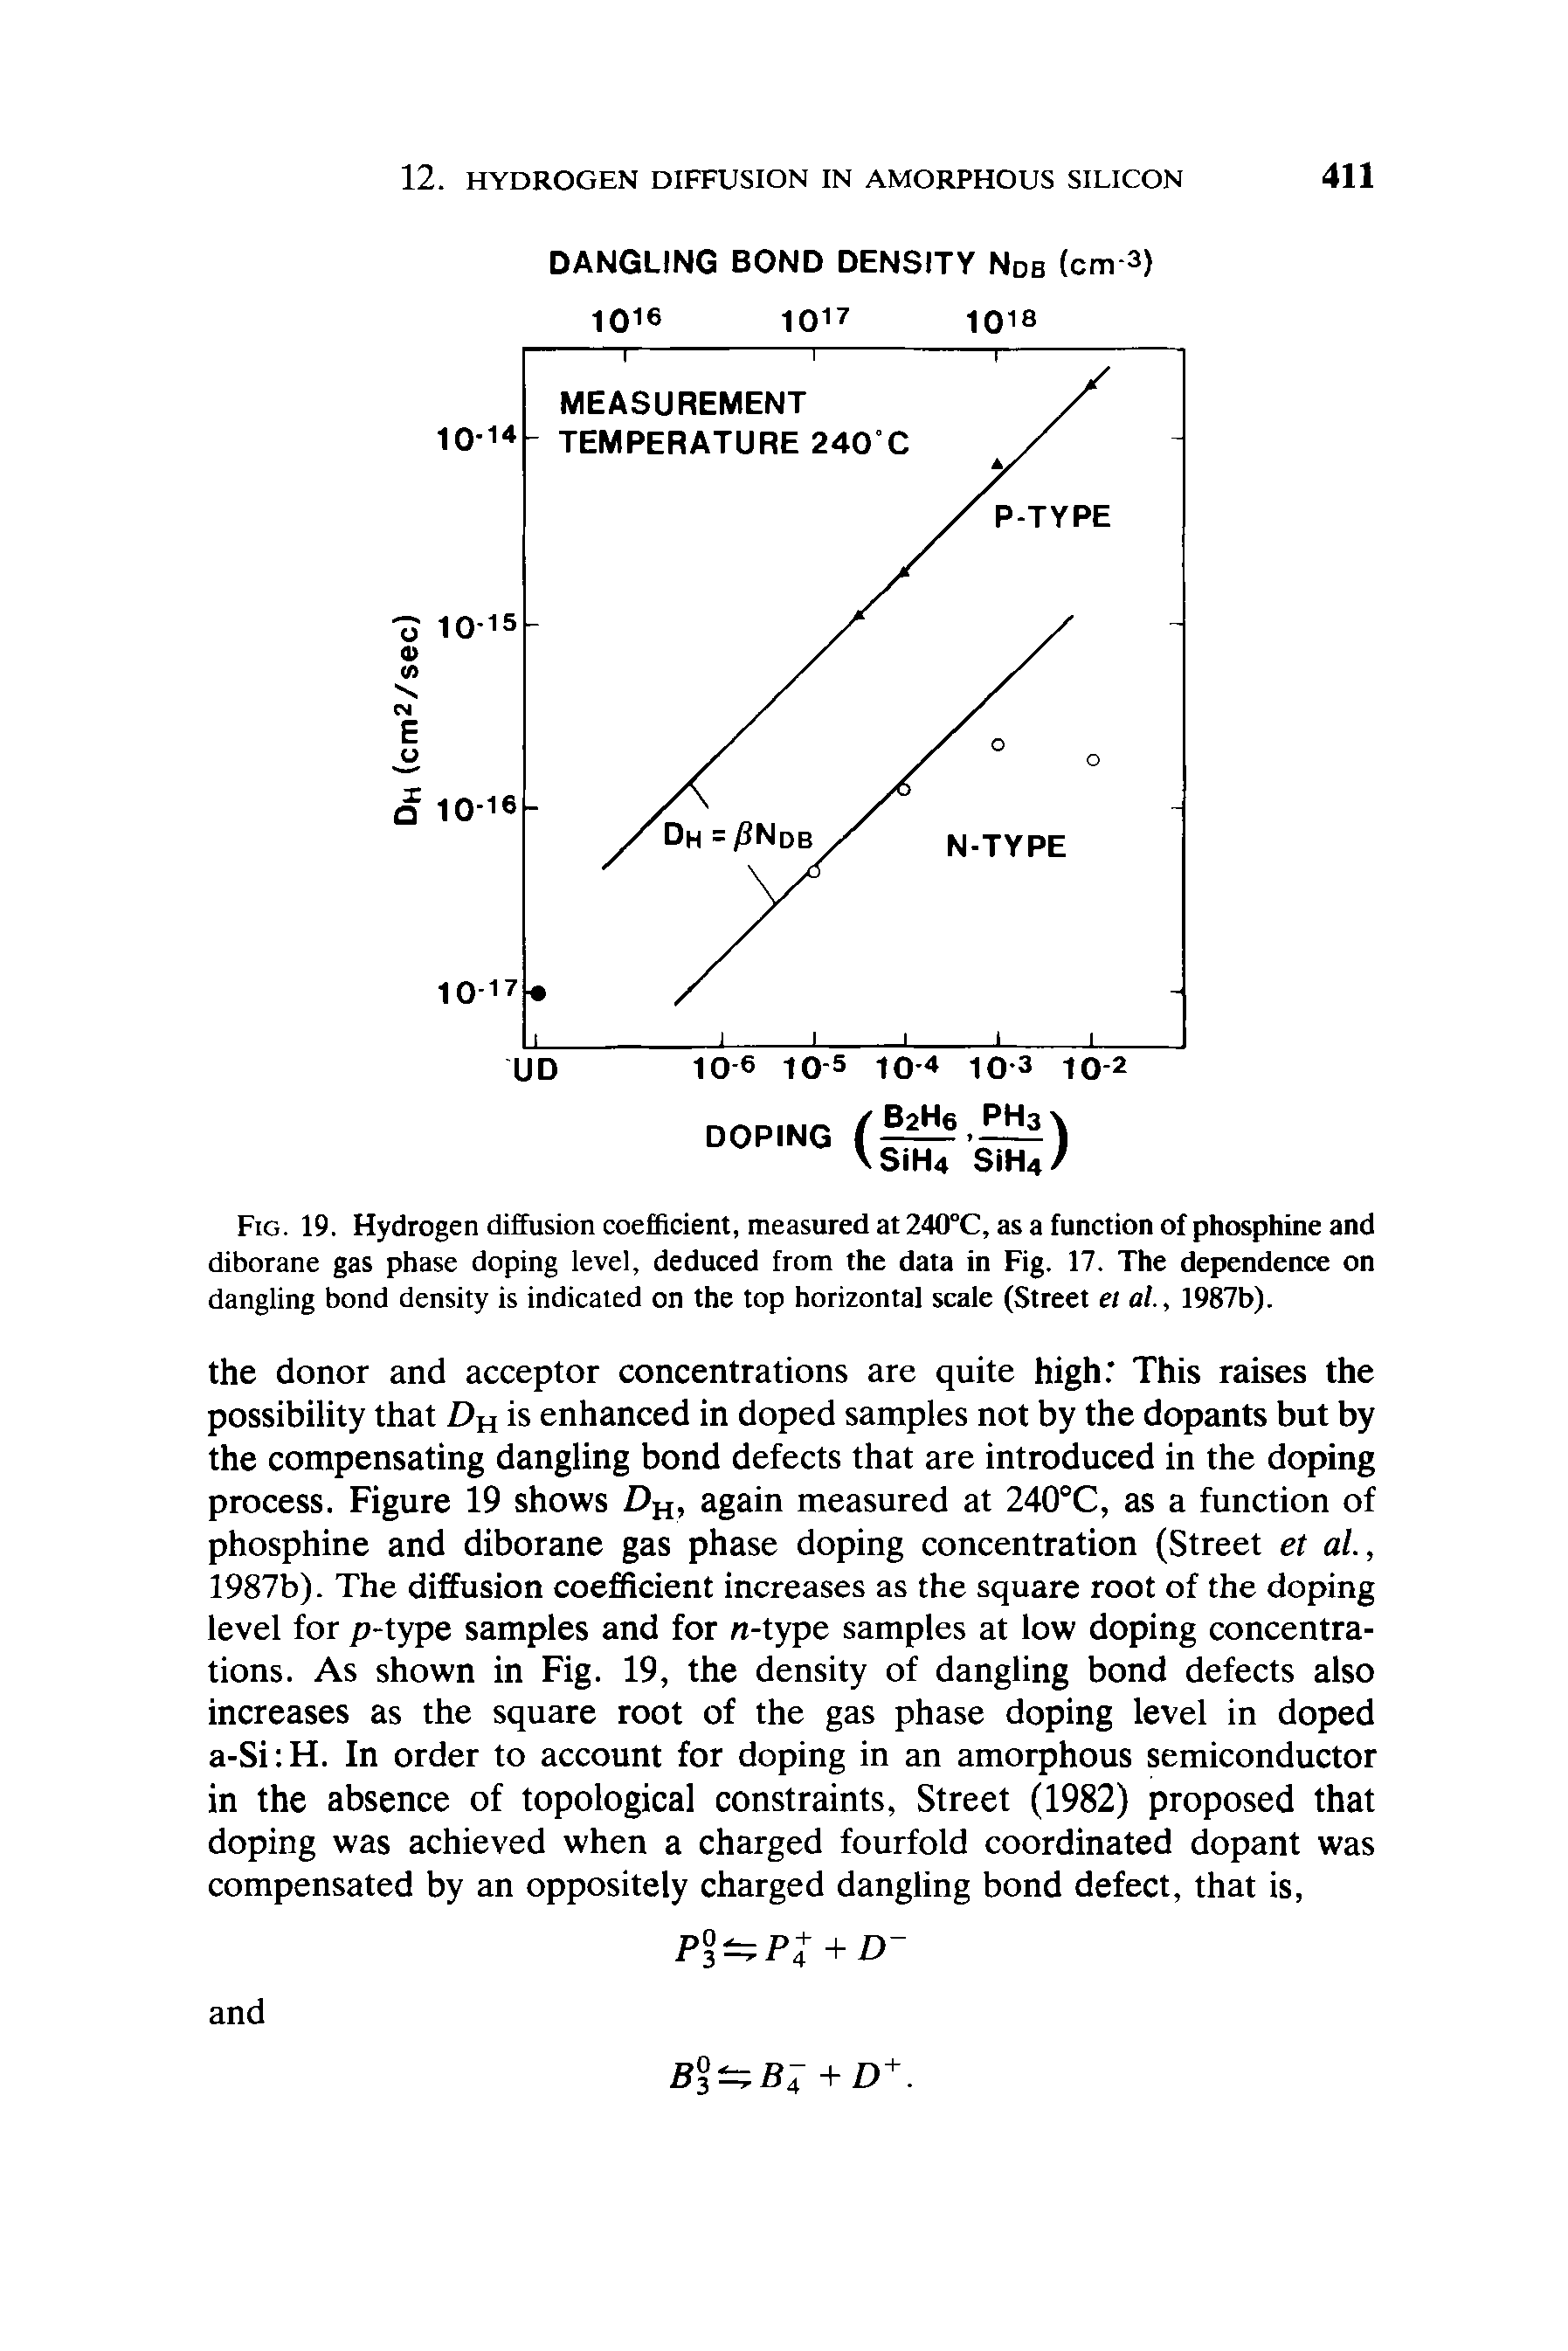 Fig. 19. Hydrogen diffusion coefficient, measured at 240°C, as a function of phosphine and diborane gas phase doping level, deduced from the data in Fig. 17. The dependence on dangling bond density is indicated on the top horizontal scale (Street el al., 1987b).